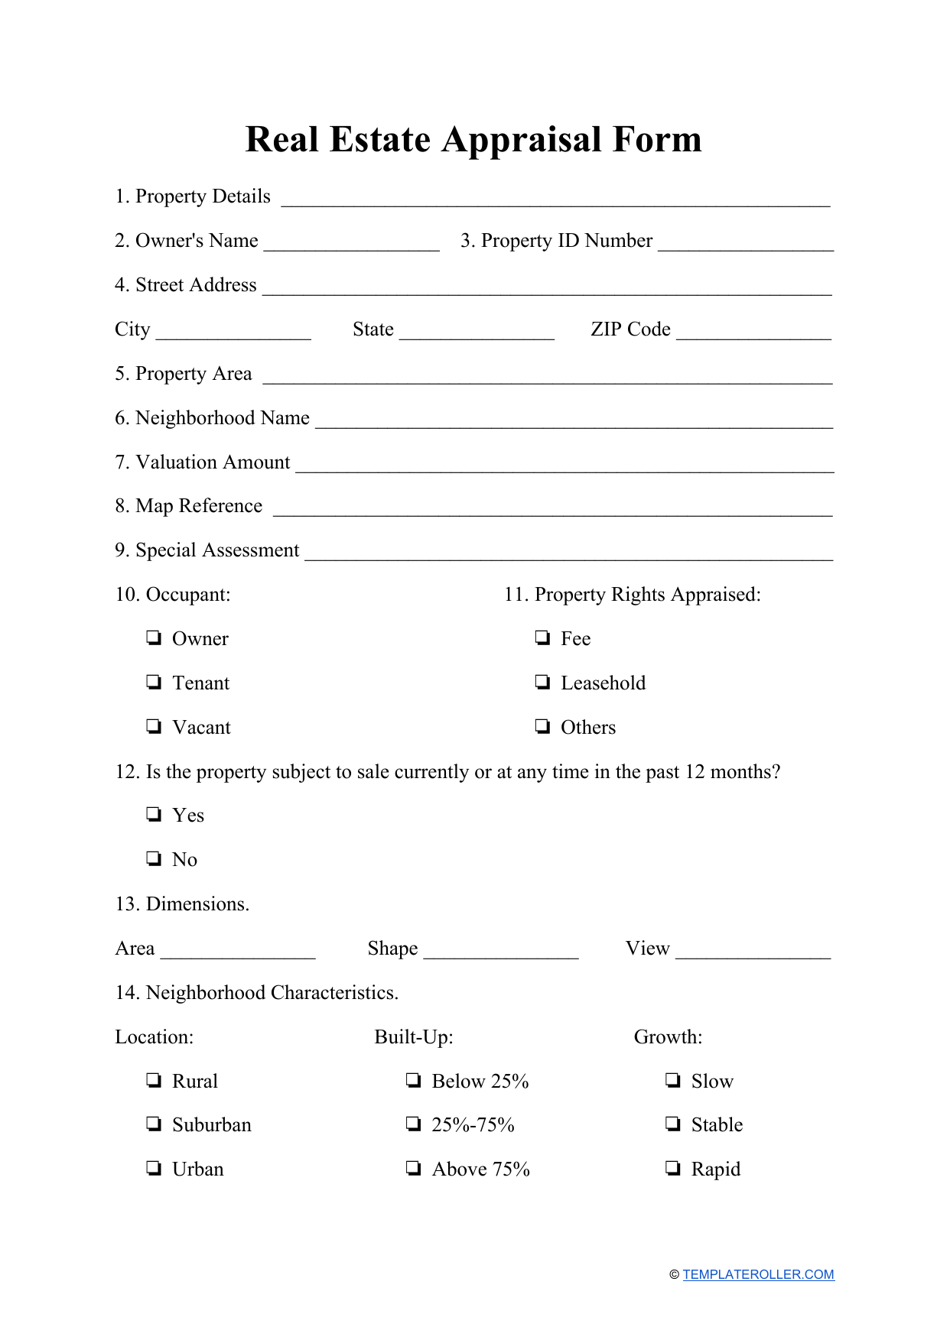 Real Estate Appraisal Form, Page 1